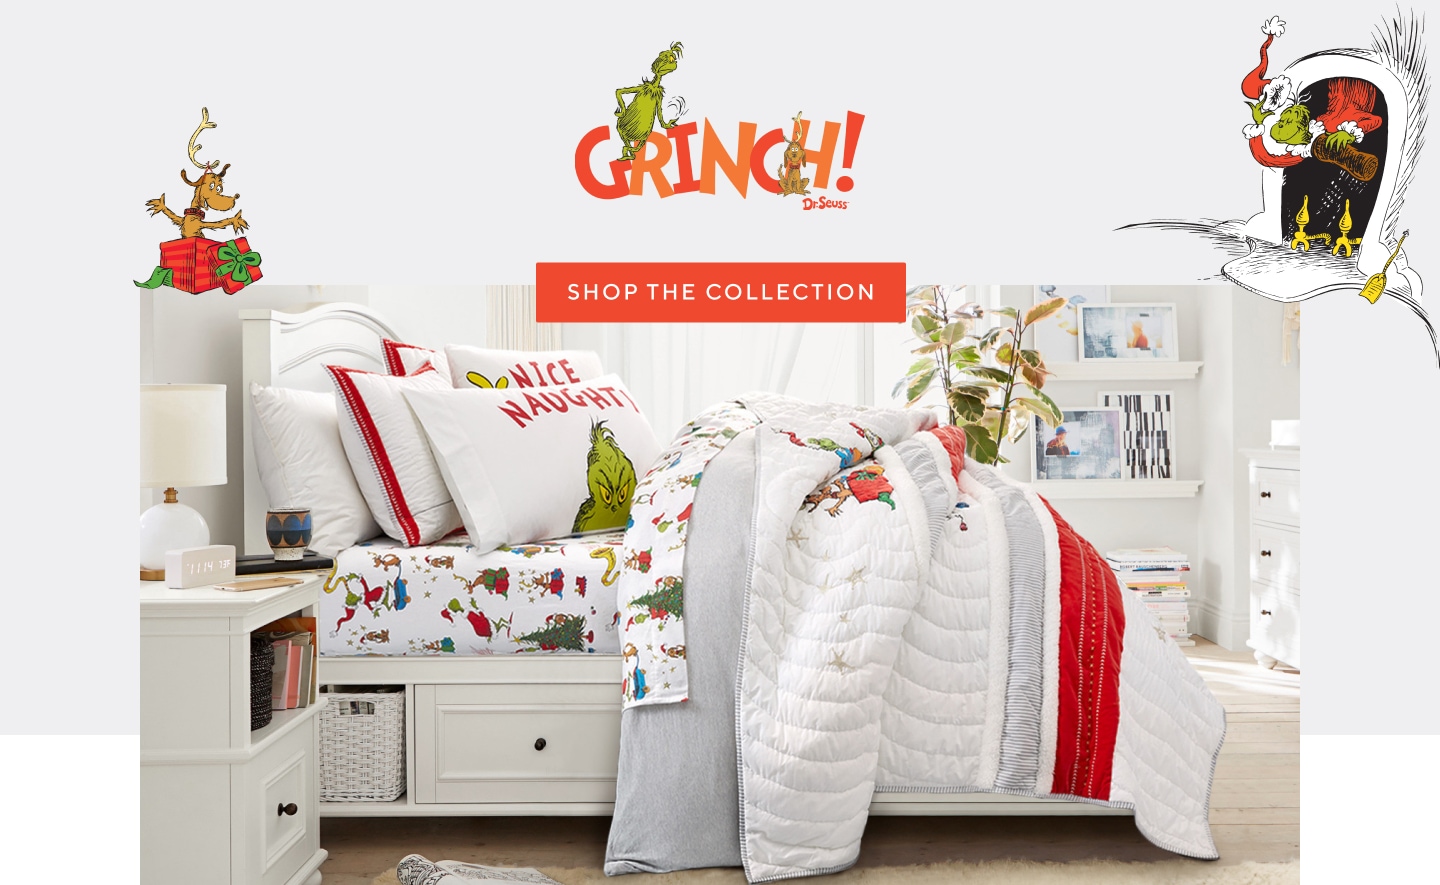 Grinch! Shop the Collection